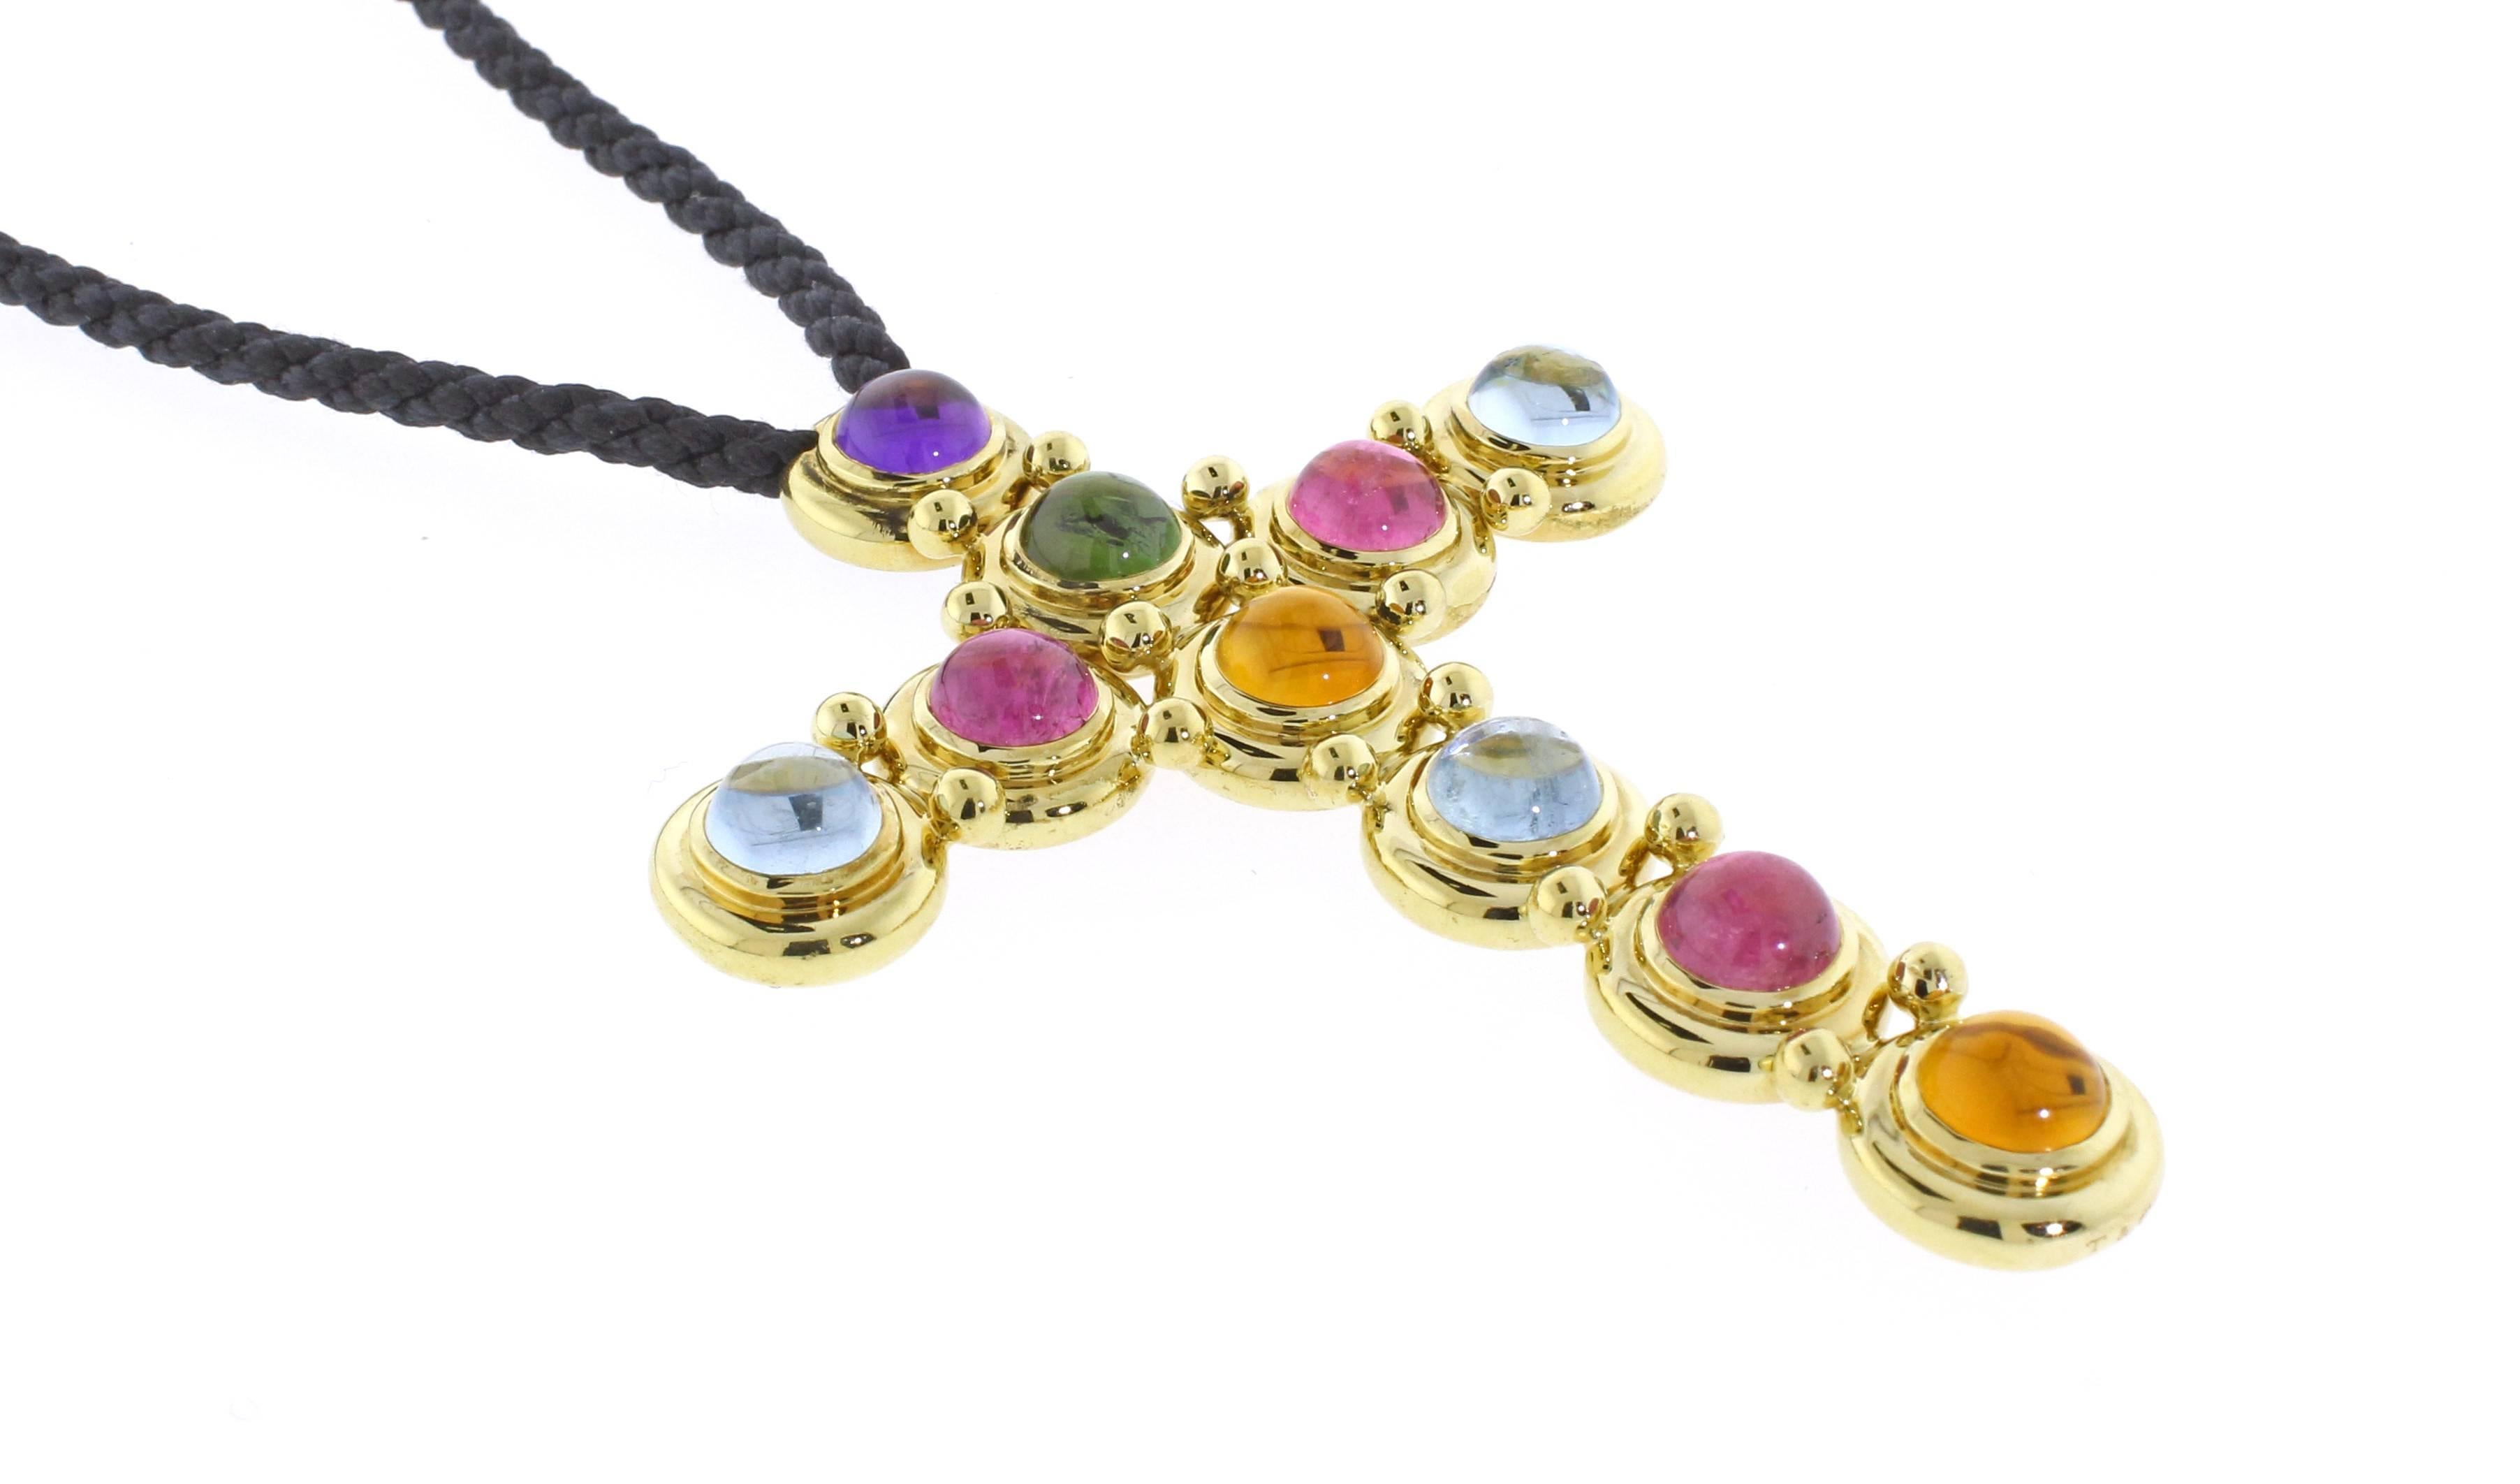 From Paloma Picasso an 18 karat gold cross set with 10 cabochon gemstones. Measuring 2 1/2 by 3 inches the cross makes a colorful statement. 30 inch black silk cord ties ties any length

8mm Cabochon Aquamarines, Amethyst, Tourmalines and Citrine 